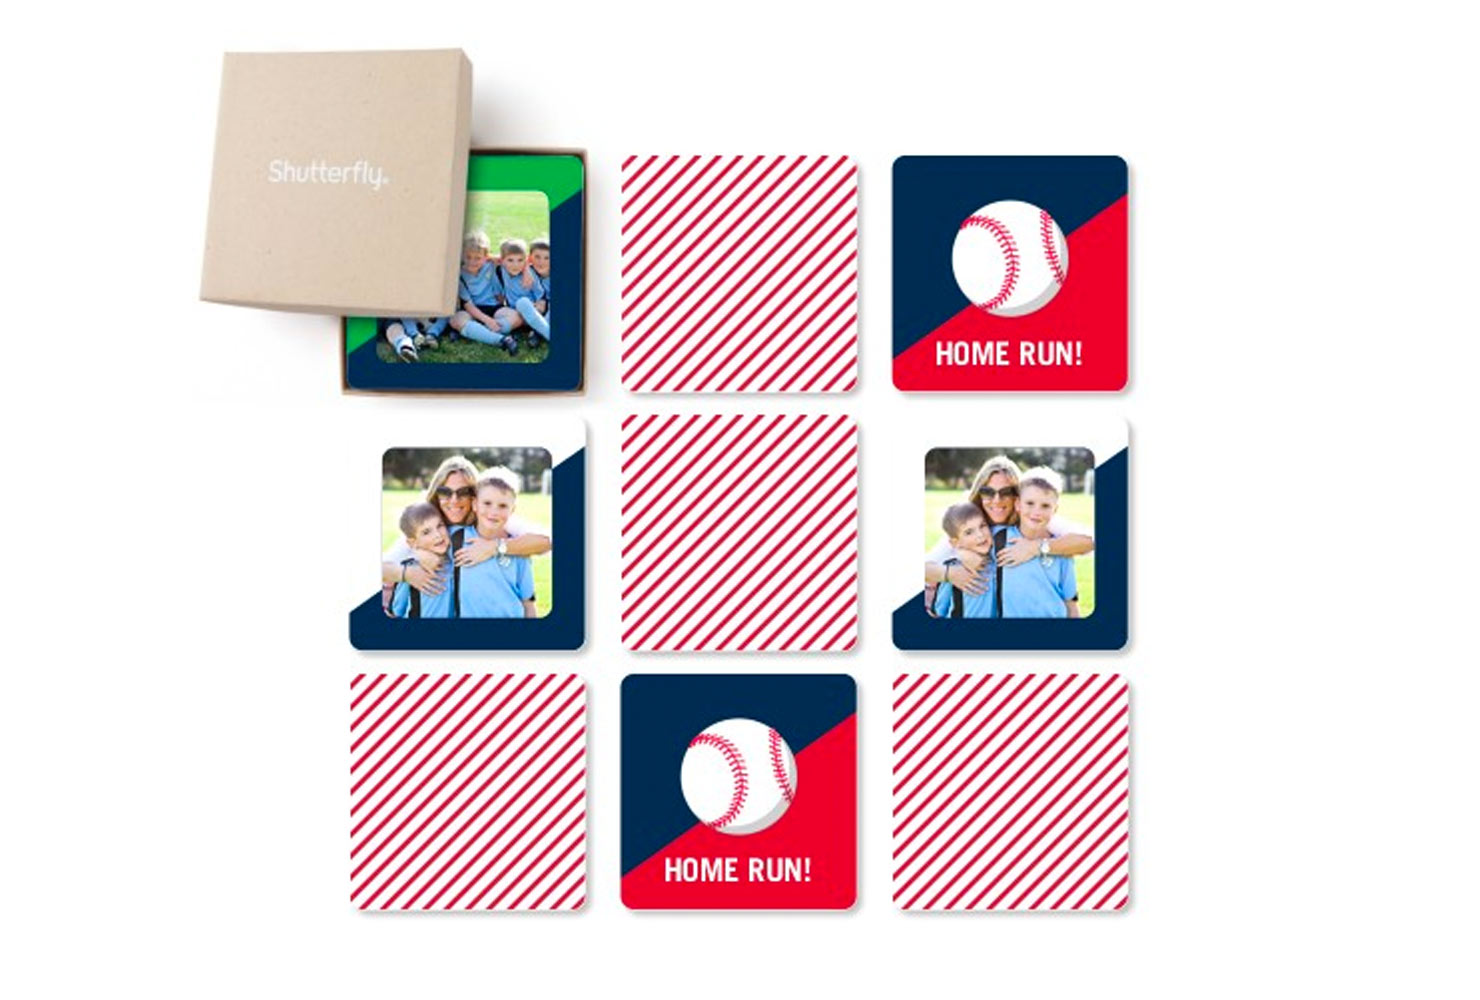 Red white and blue striped memory card game.